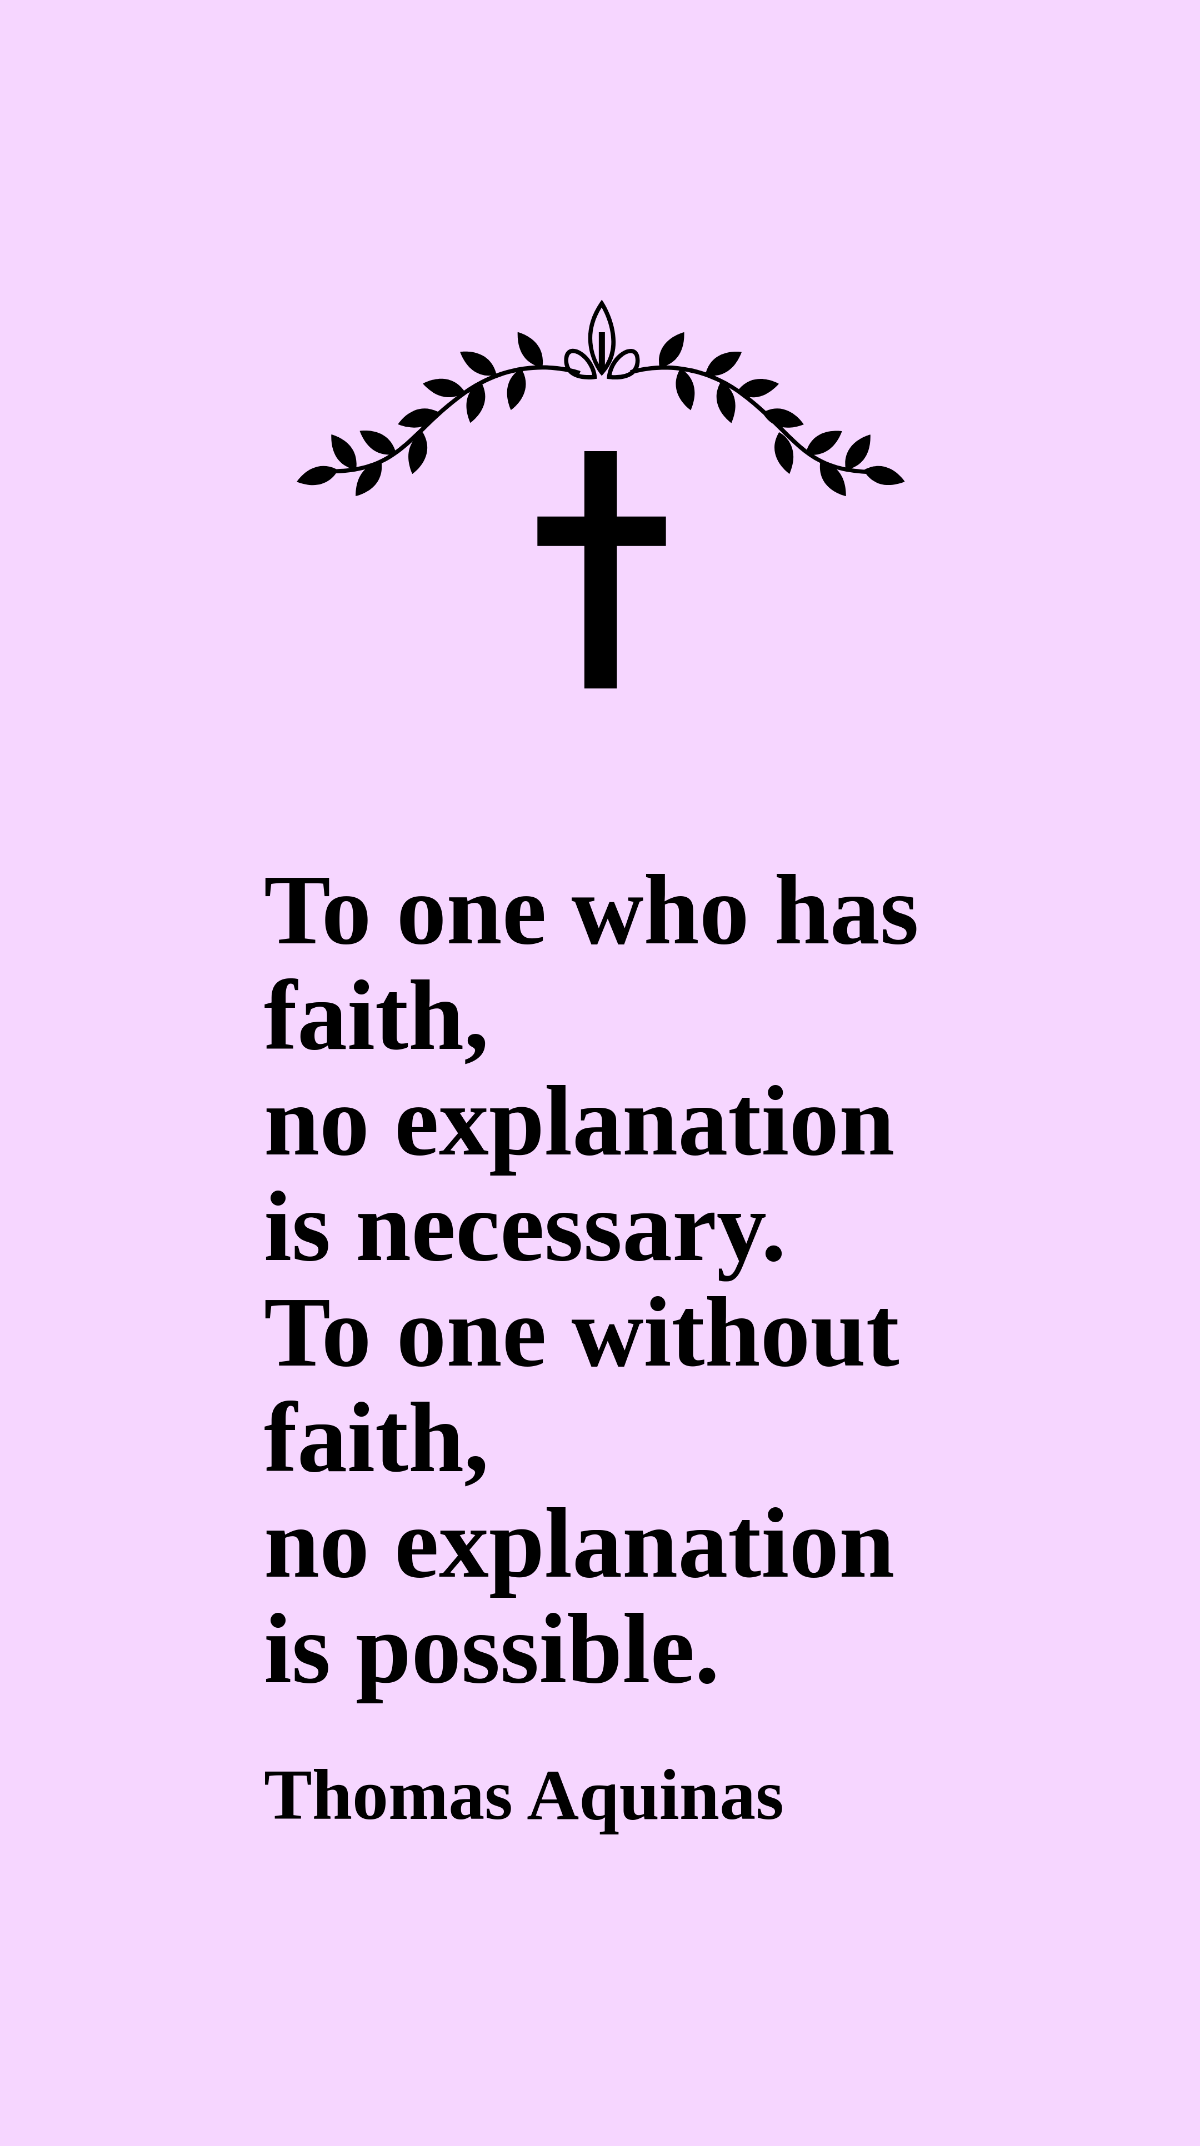 Free Thomas Aquinas - To one who has faith, no explanation is necessary. To one without faith, no explanation is possible. Template